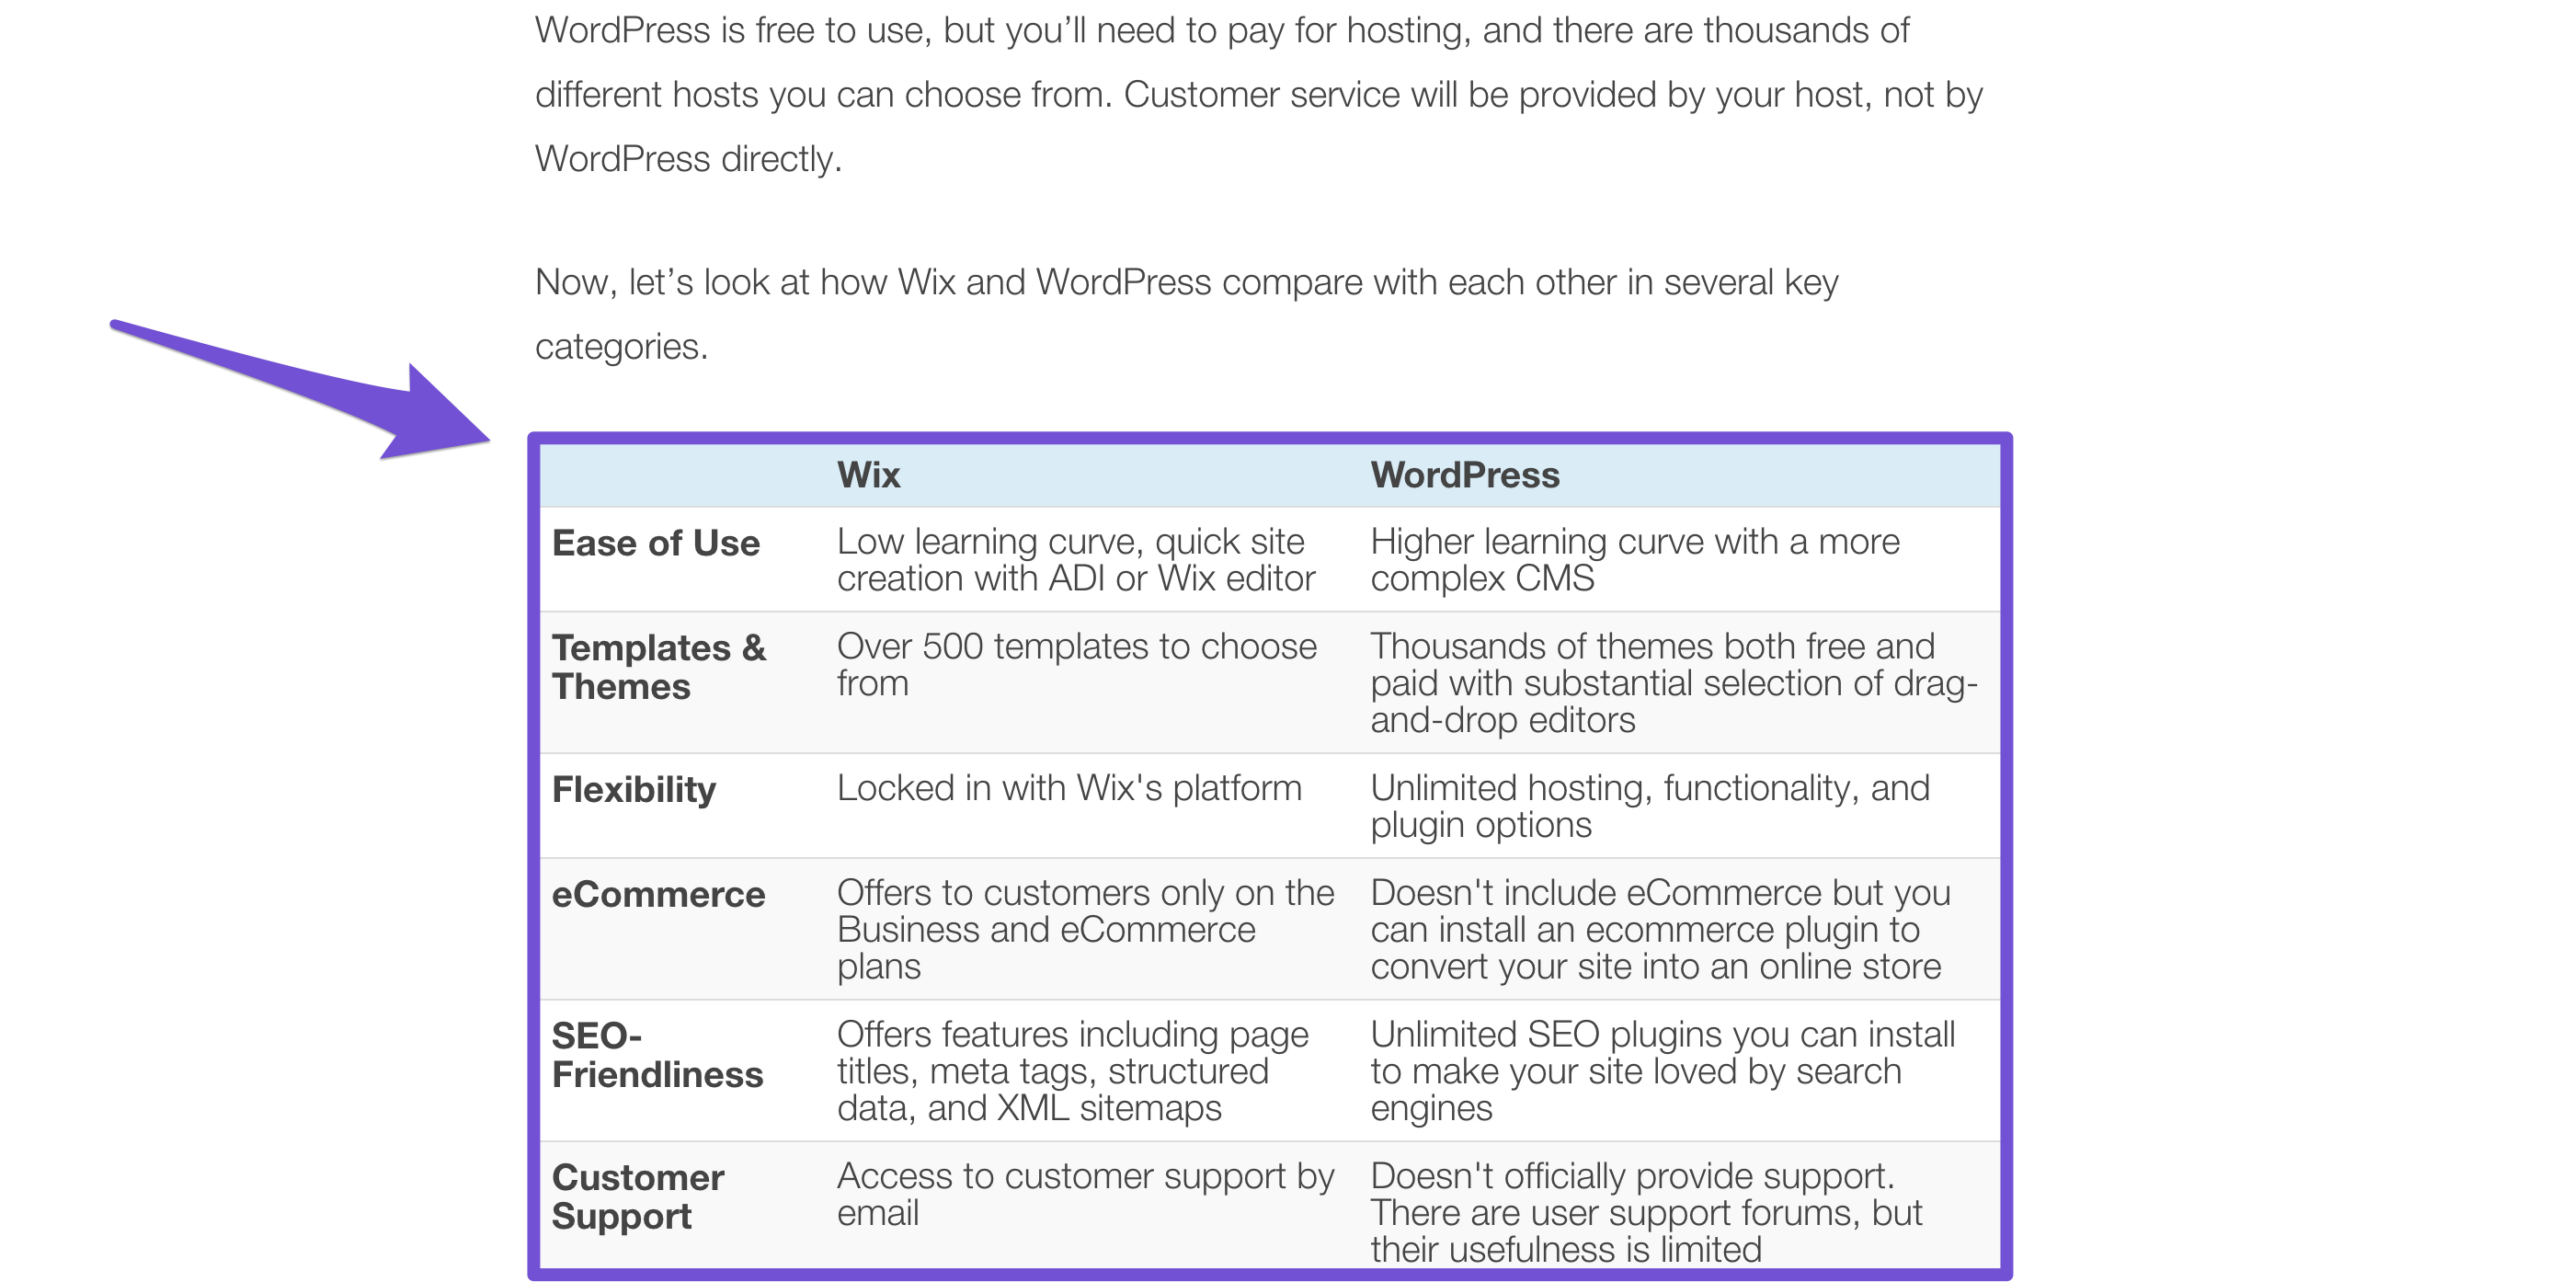 wix vs wordpress features table